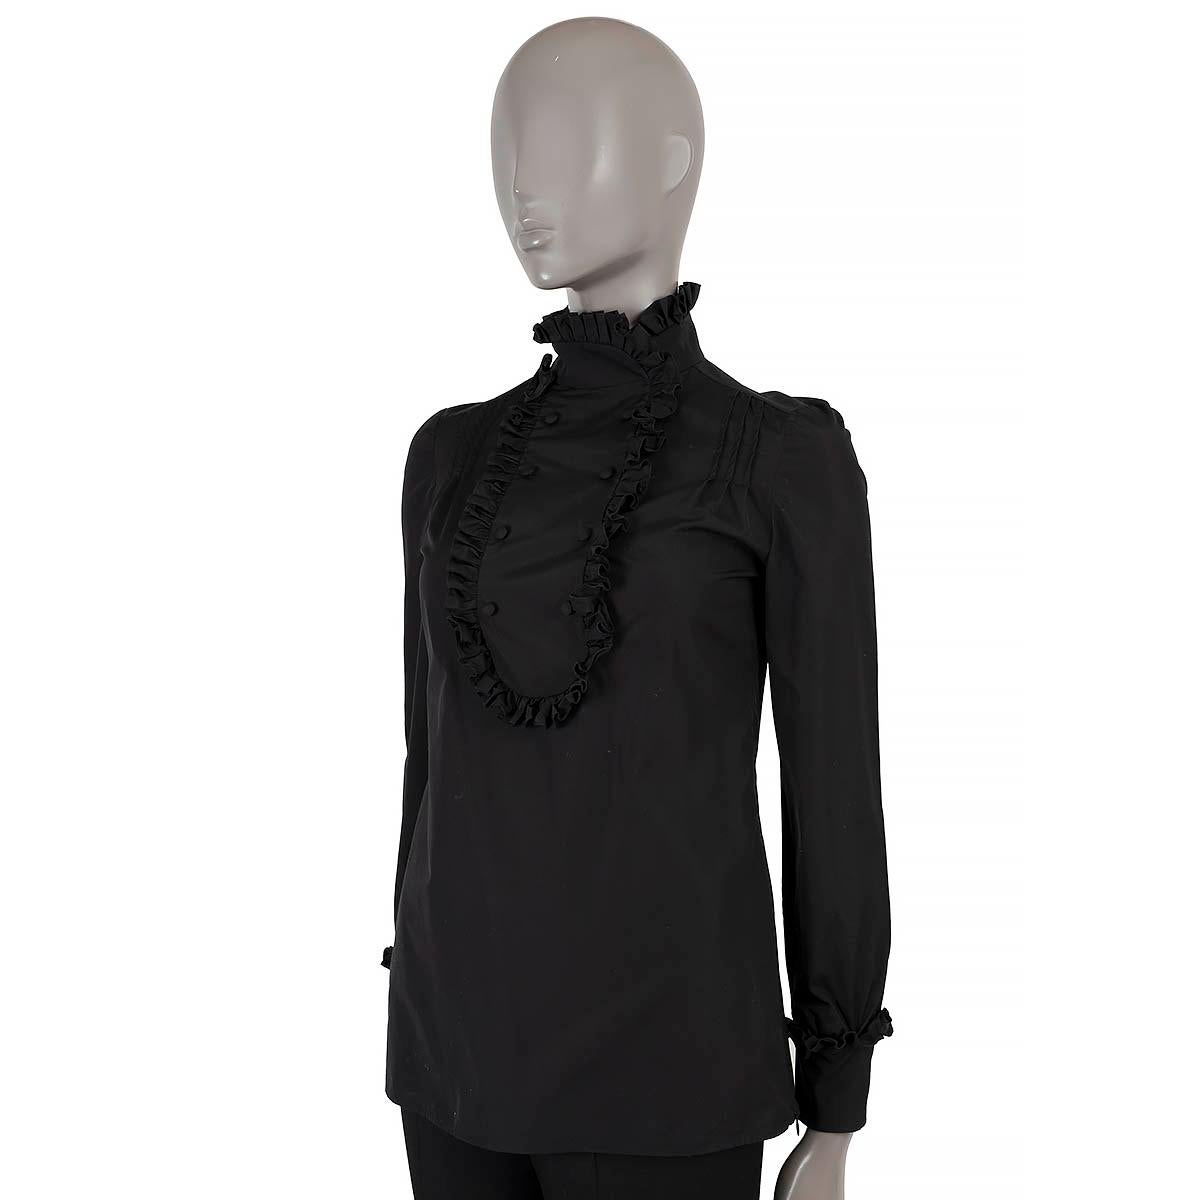 100% authentic Prada blouse in black cotton (100%). Features a high-neck, bib and ruffle trim and a zipper on the side. Has been worn and is in excellent condition.

2020 Pre-Fall
Measurements


Tag Size	38
Size	XS
Shoulder Width	36cm (14in)
Bust